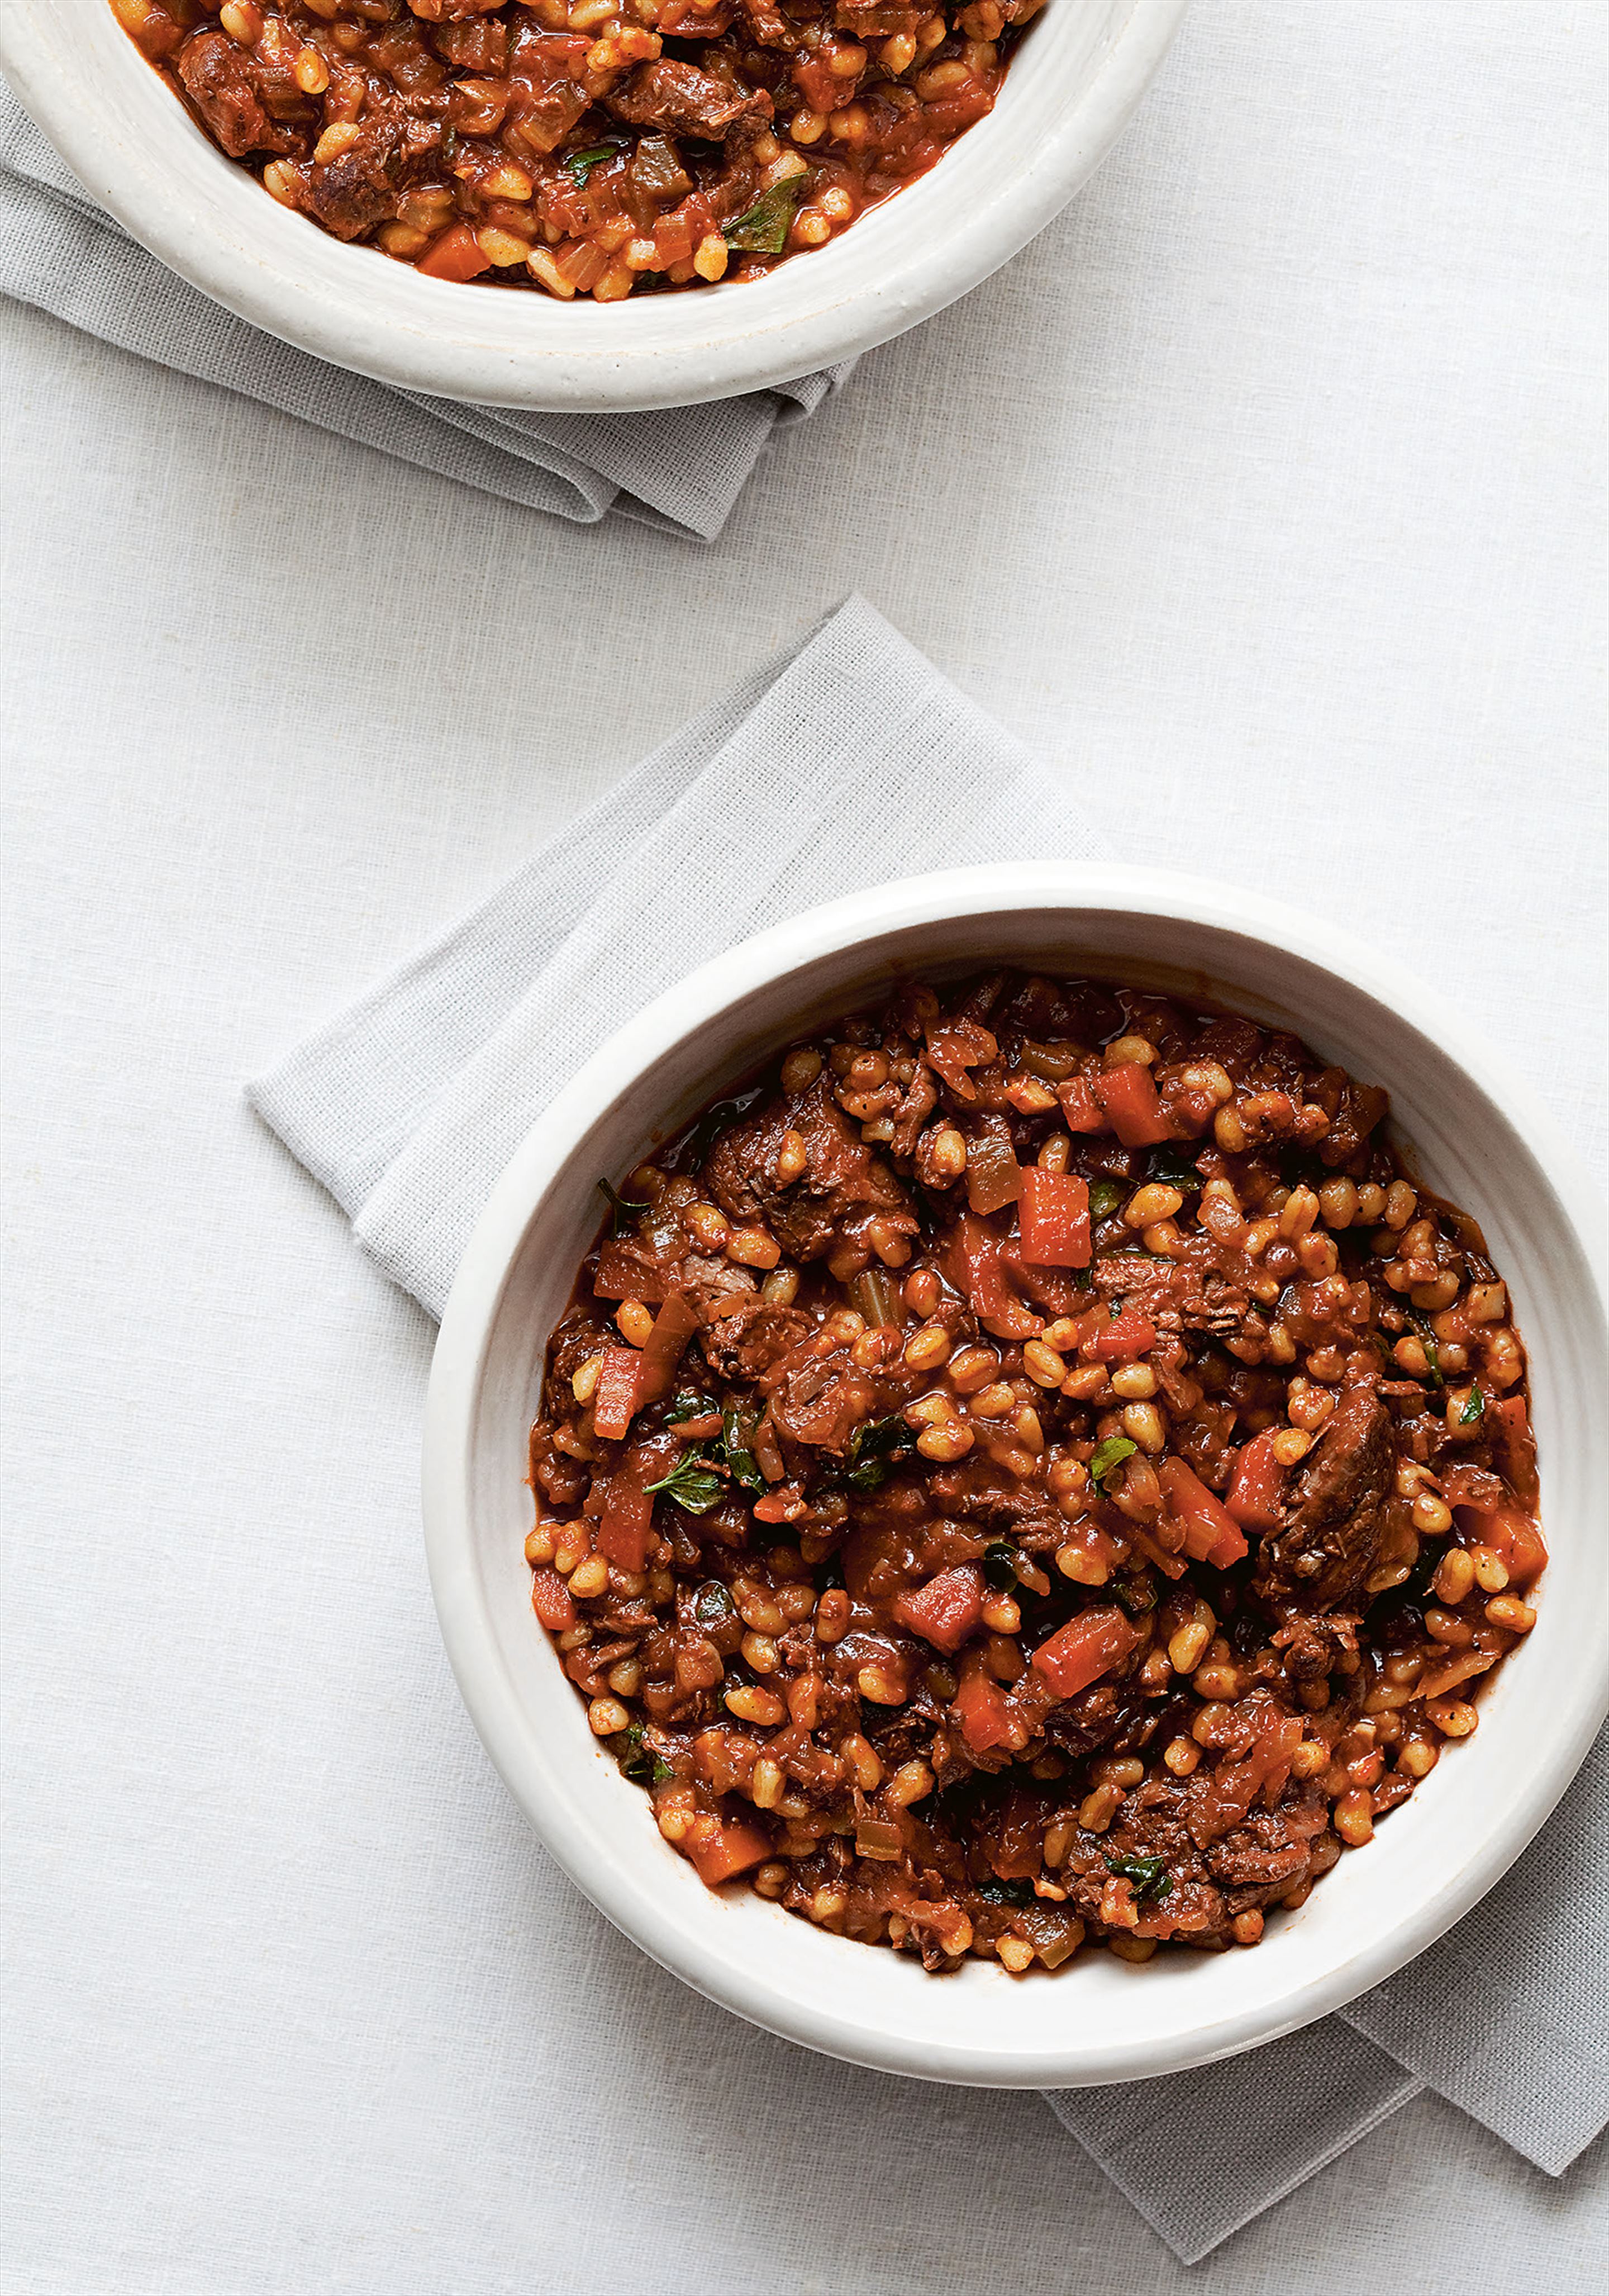 Slow-cooked venison with wheat berries